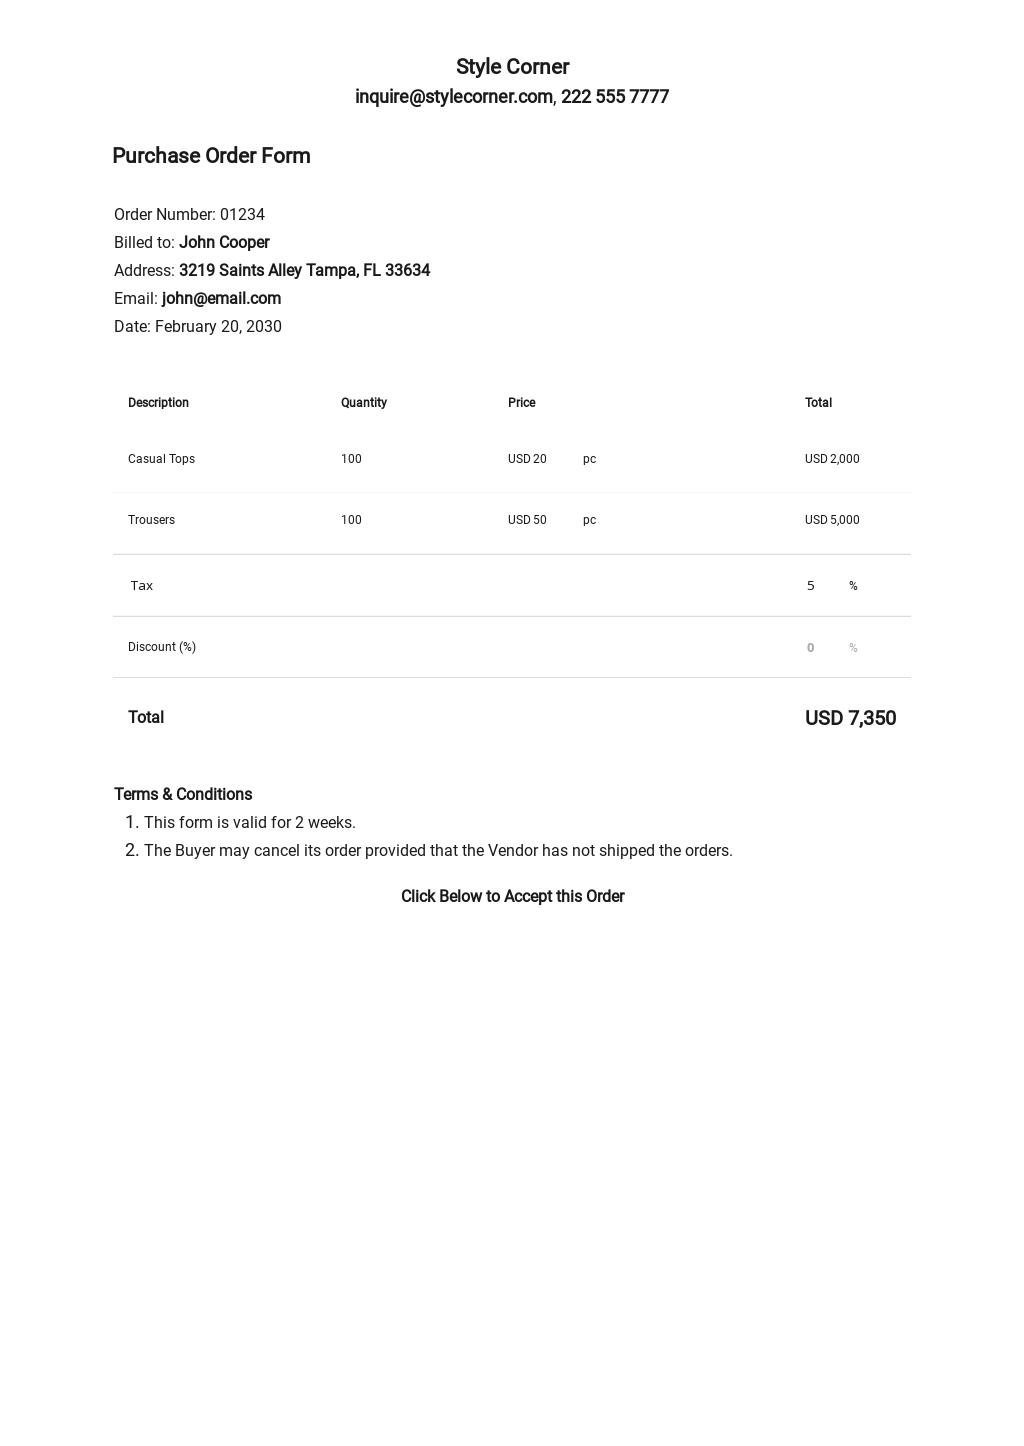 Free Purchase Order Form.jpe